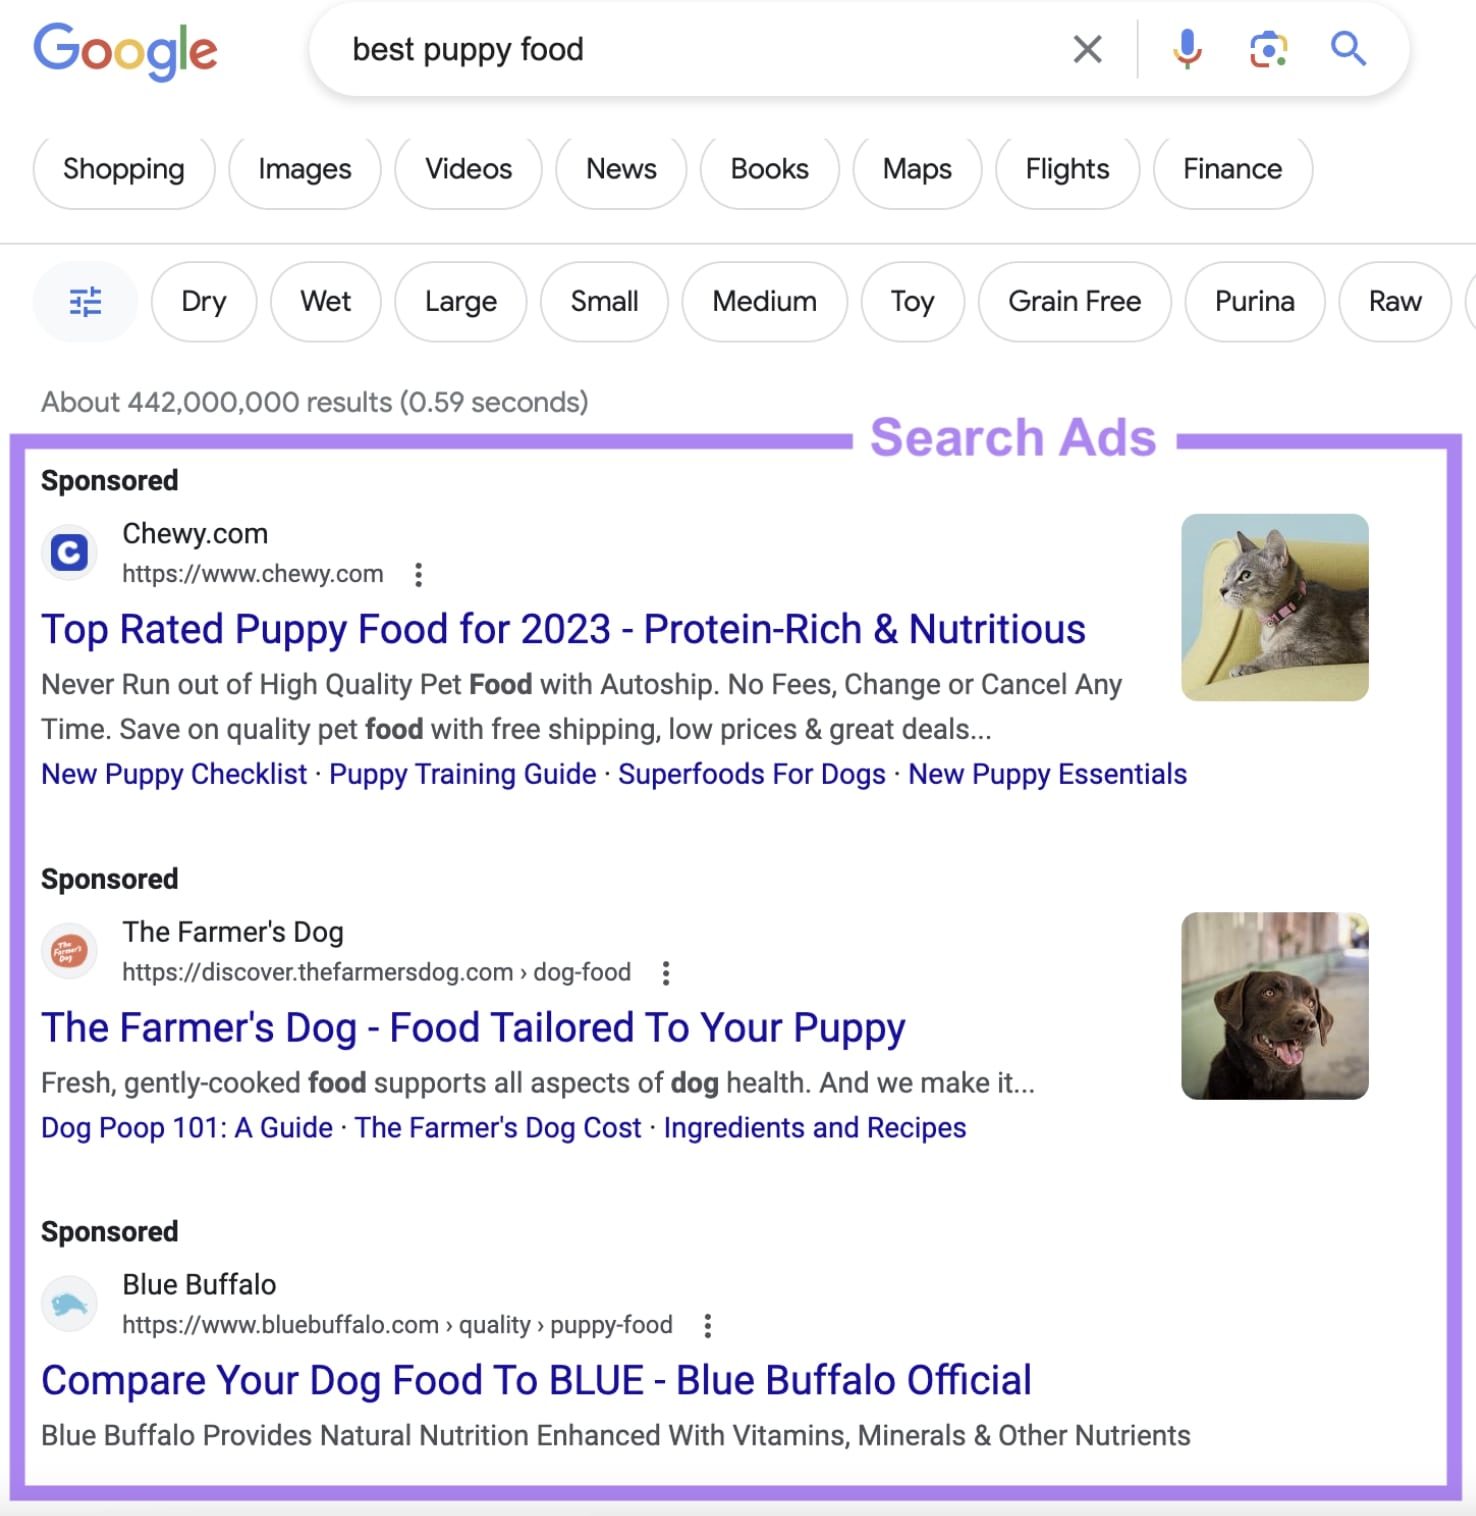 Google search ads for “best puppy food" query